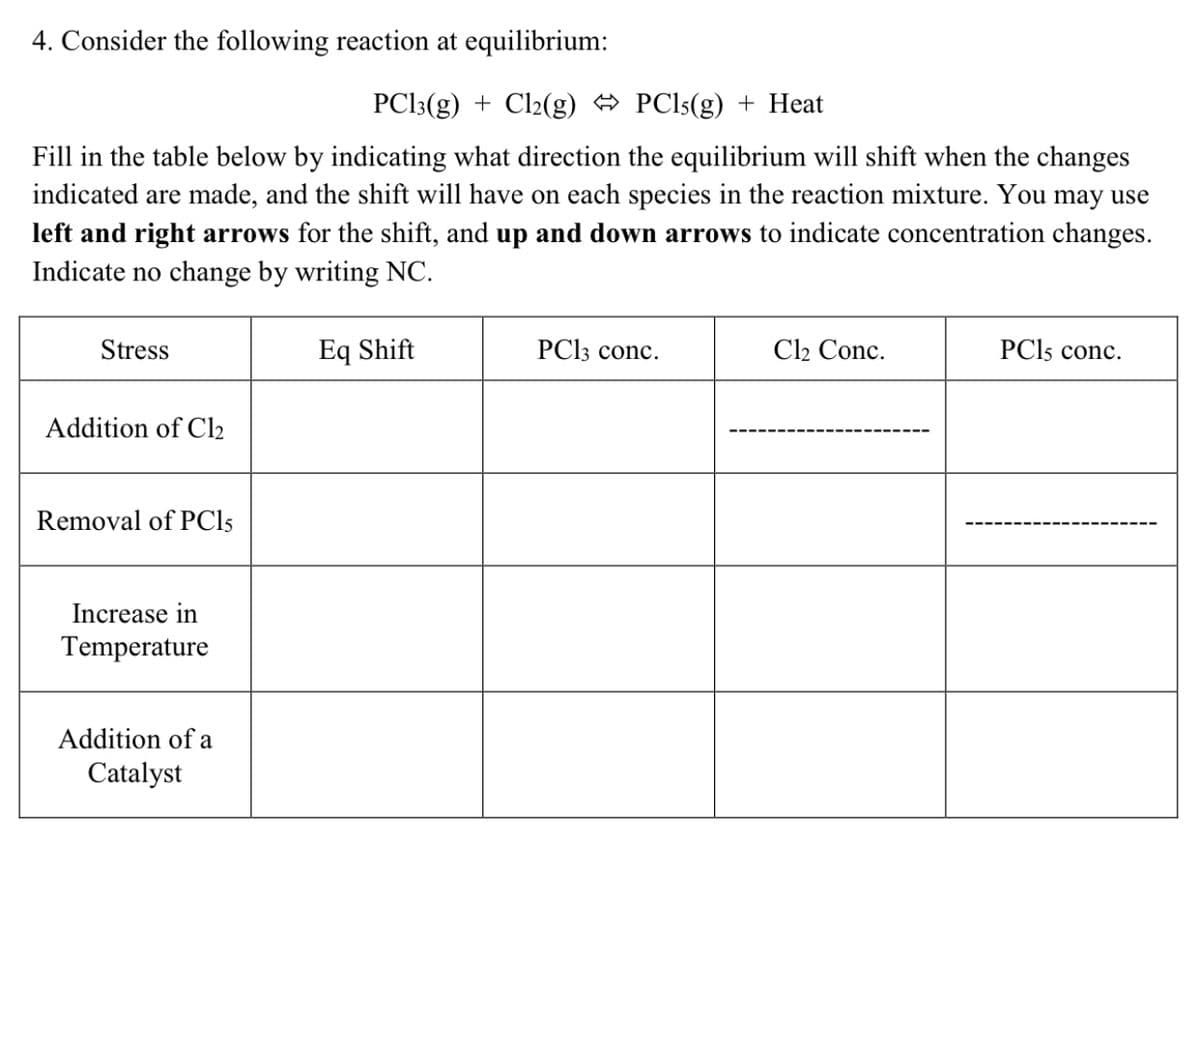 4. Consider the following reaction at equilibrium:
PC|3(g) + Cl2(g) PCI5(g) + Heat
Fill in the table below by indicating what direction the equilibrium will shift when the changes
indicated are made, and the shift will have on each species in the reaction mixture. You may use
left and right arrows for the shift, and up and down arrows to indicate concentration changes.
Indicate no change by writing NC.
Stress
Eq Shift
PC13 conc.
Cl2 Conc.
PCI5 conc.
Addition of Cl2
Removal of PCI5
Increase in
Temperature
Addition of a
Catalyst
